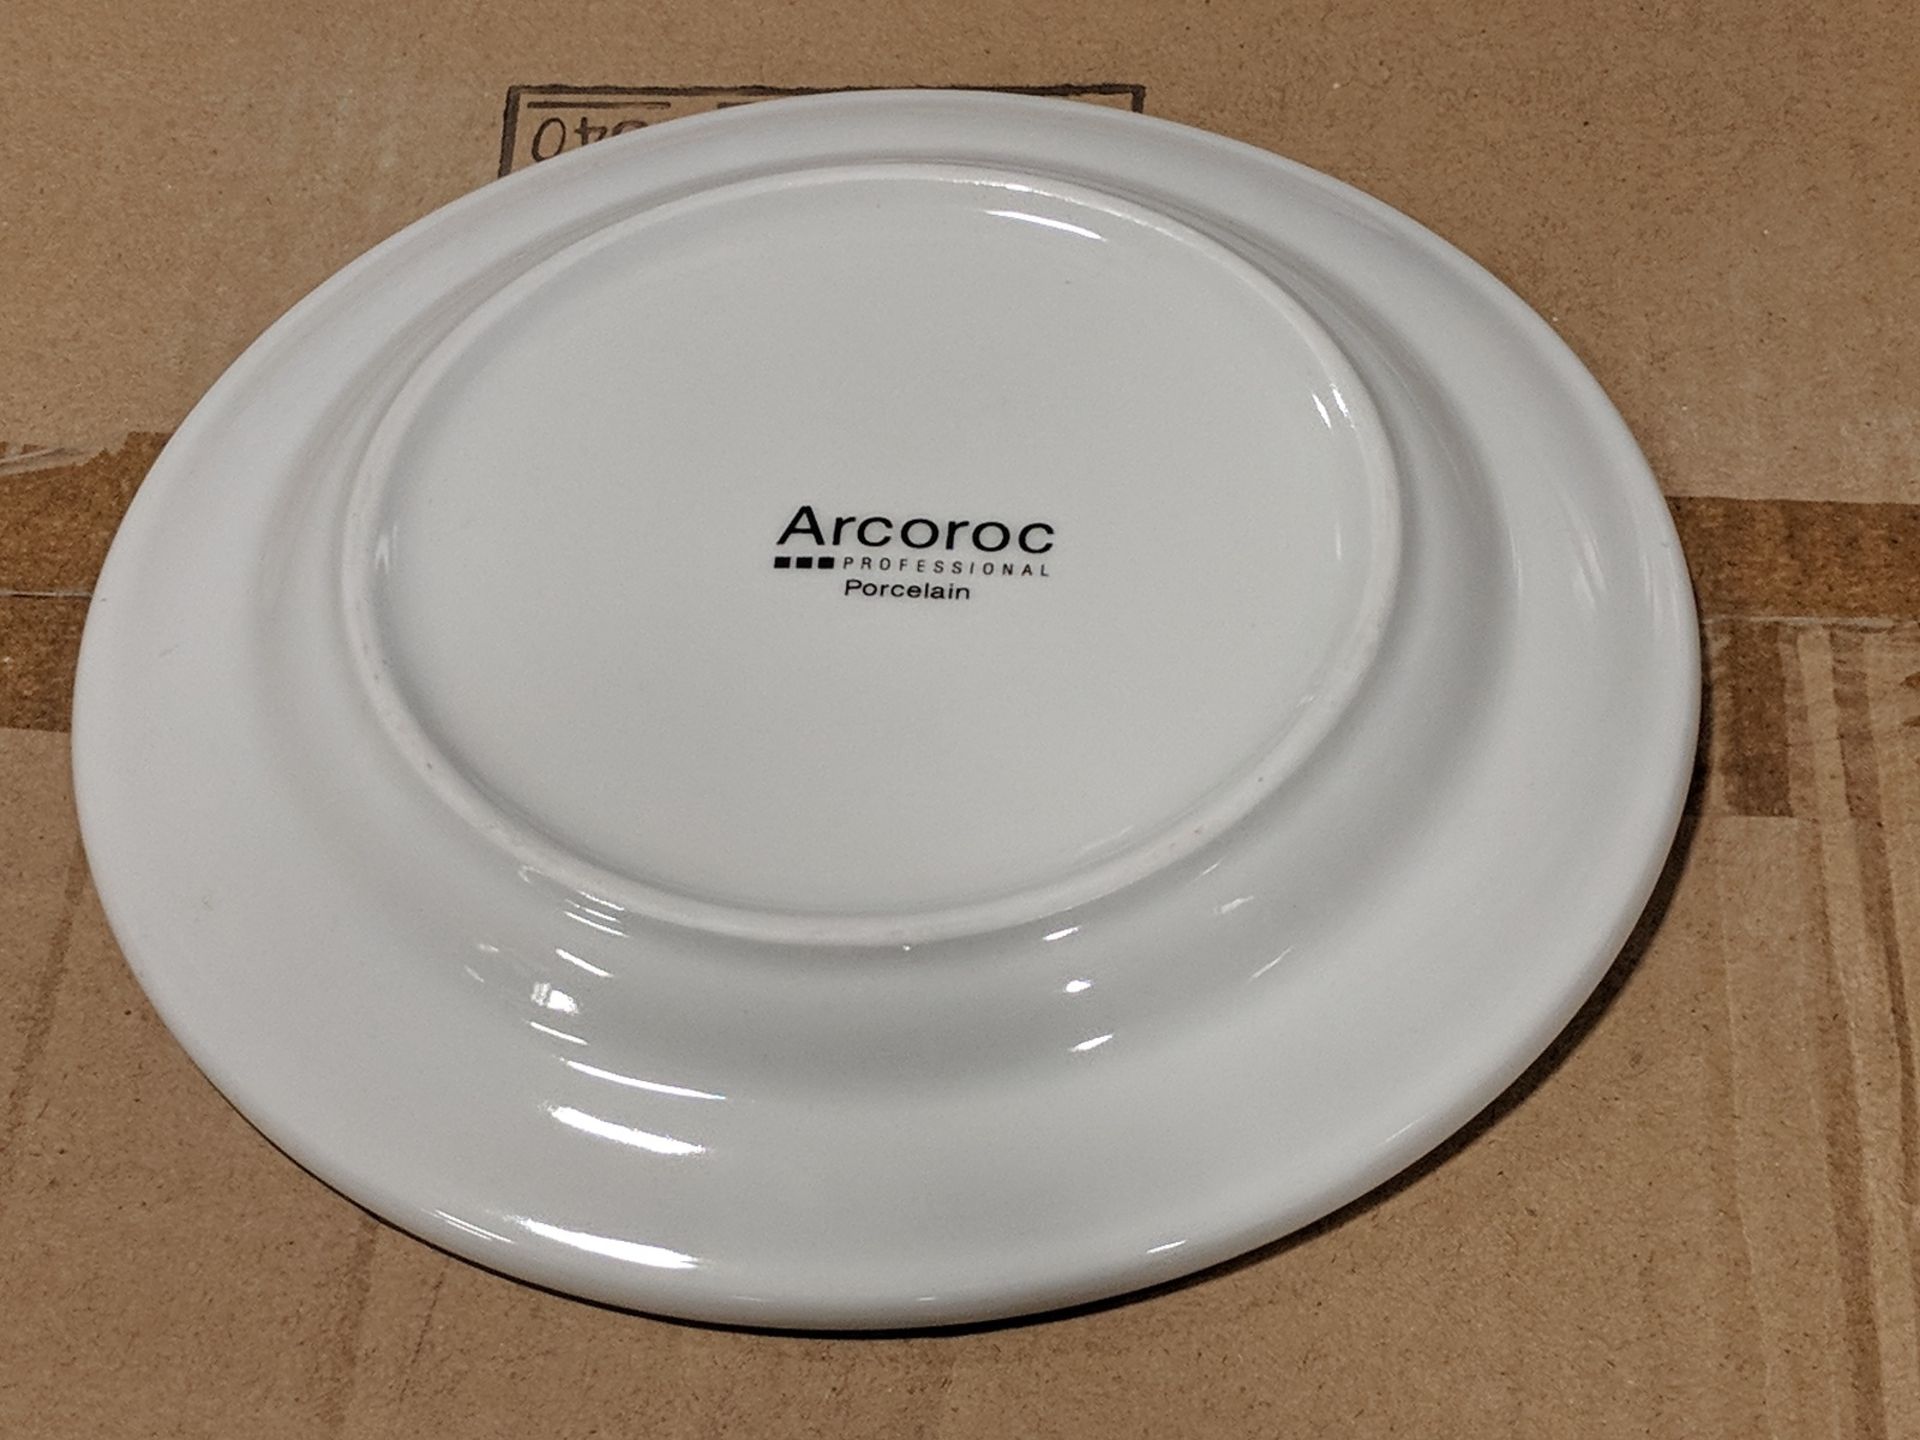 7" White Porcelain Plates, Arcoroc FF414 - Lot of 36 - Image 3 of 3